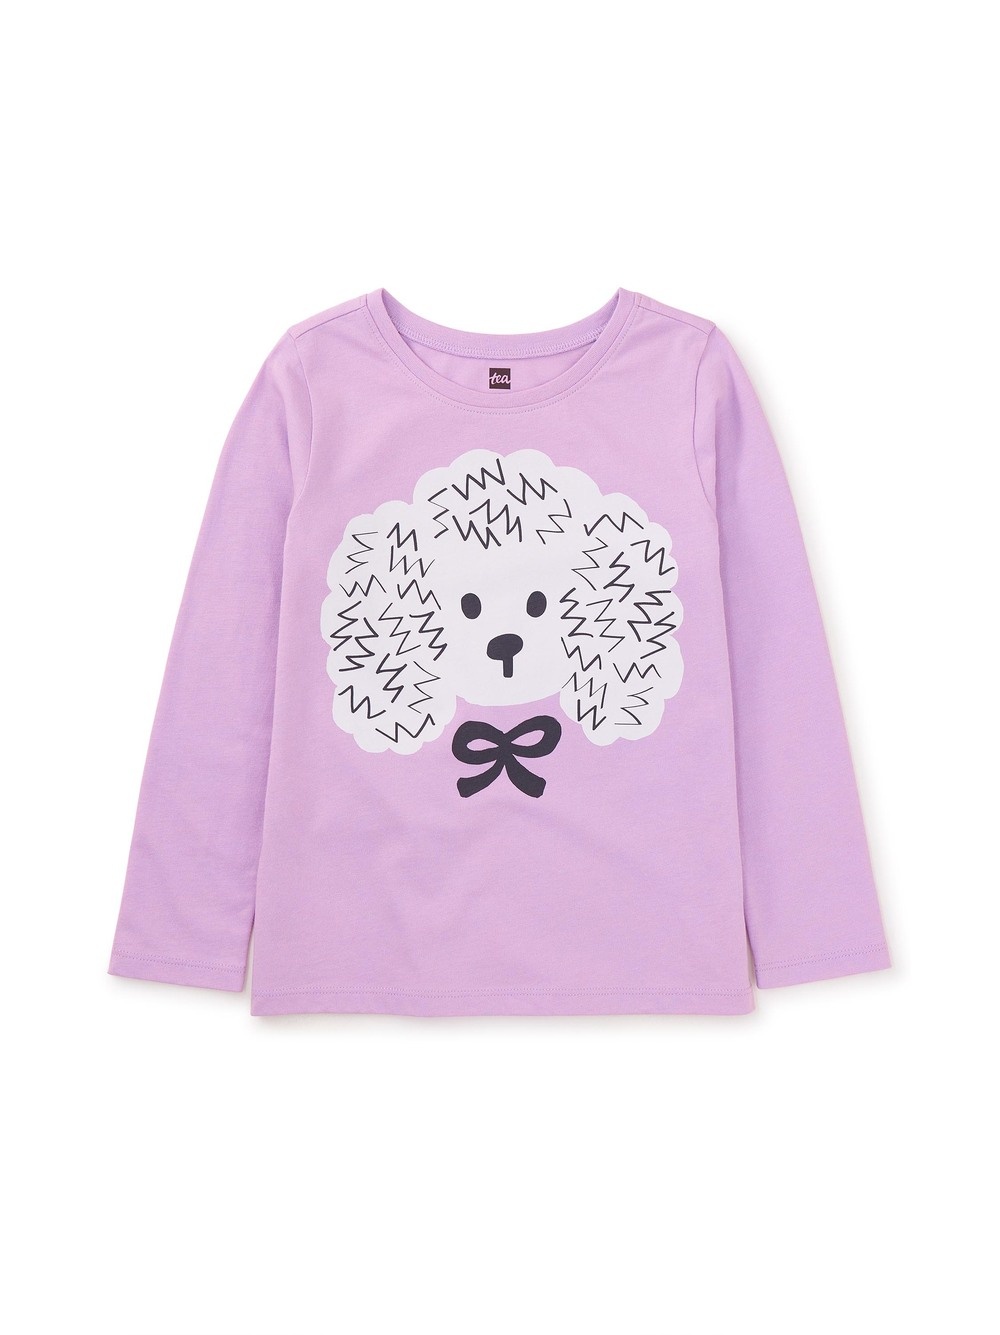 Tea Collection Sheer Lilac Poodle & Bow Graphic Tee